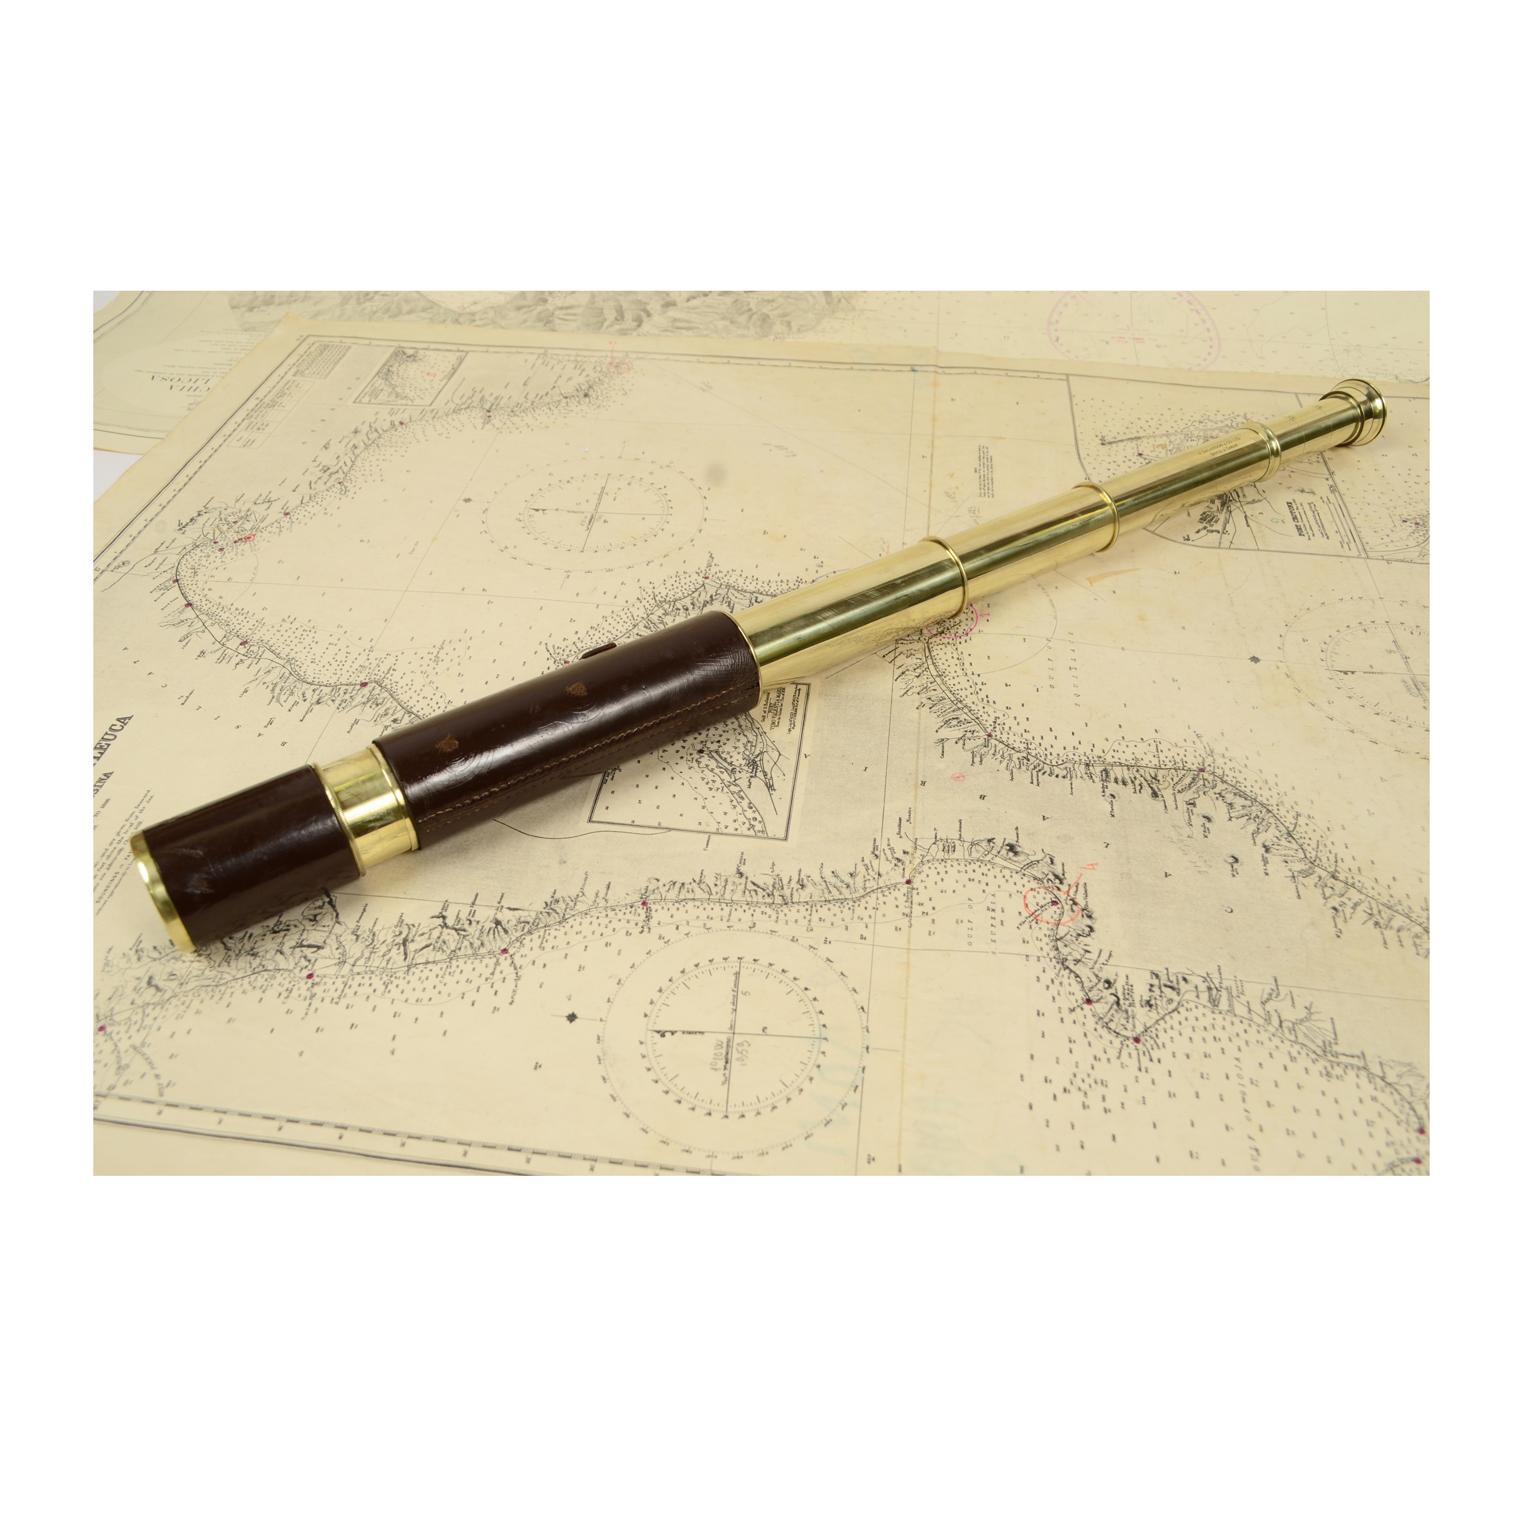 Brass telescope with leather-covered handle signed H. SALANSON & Co Ltd Bristol & Cardiff, early 1900s. Four extensions focus, complete with sunshade extension. Maximum length 84.5 cm, minimum 27 cm, focal diameter 4.5 cm. Excellent condition, fully